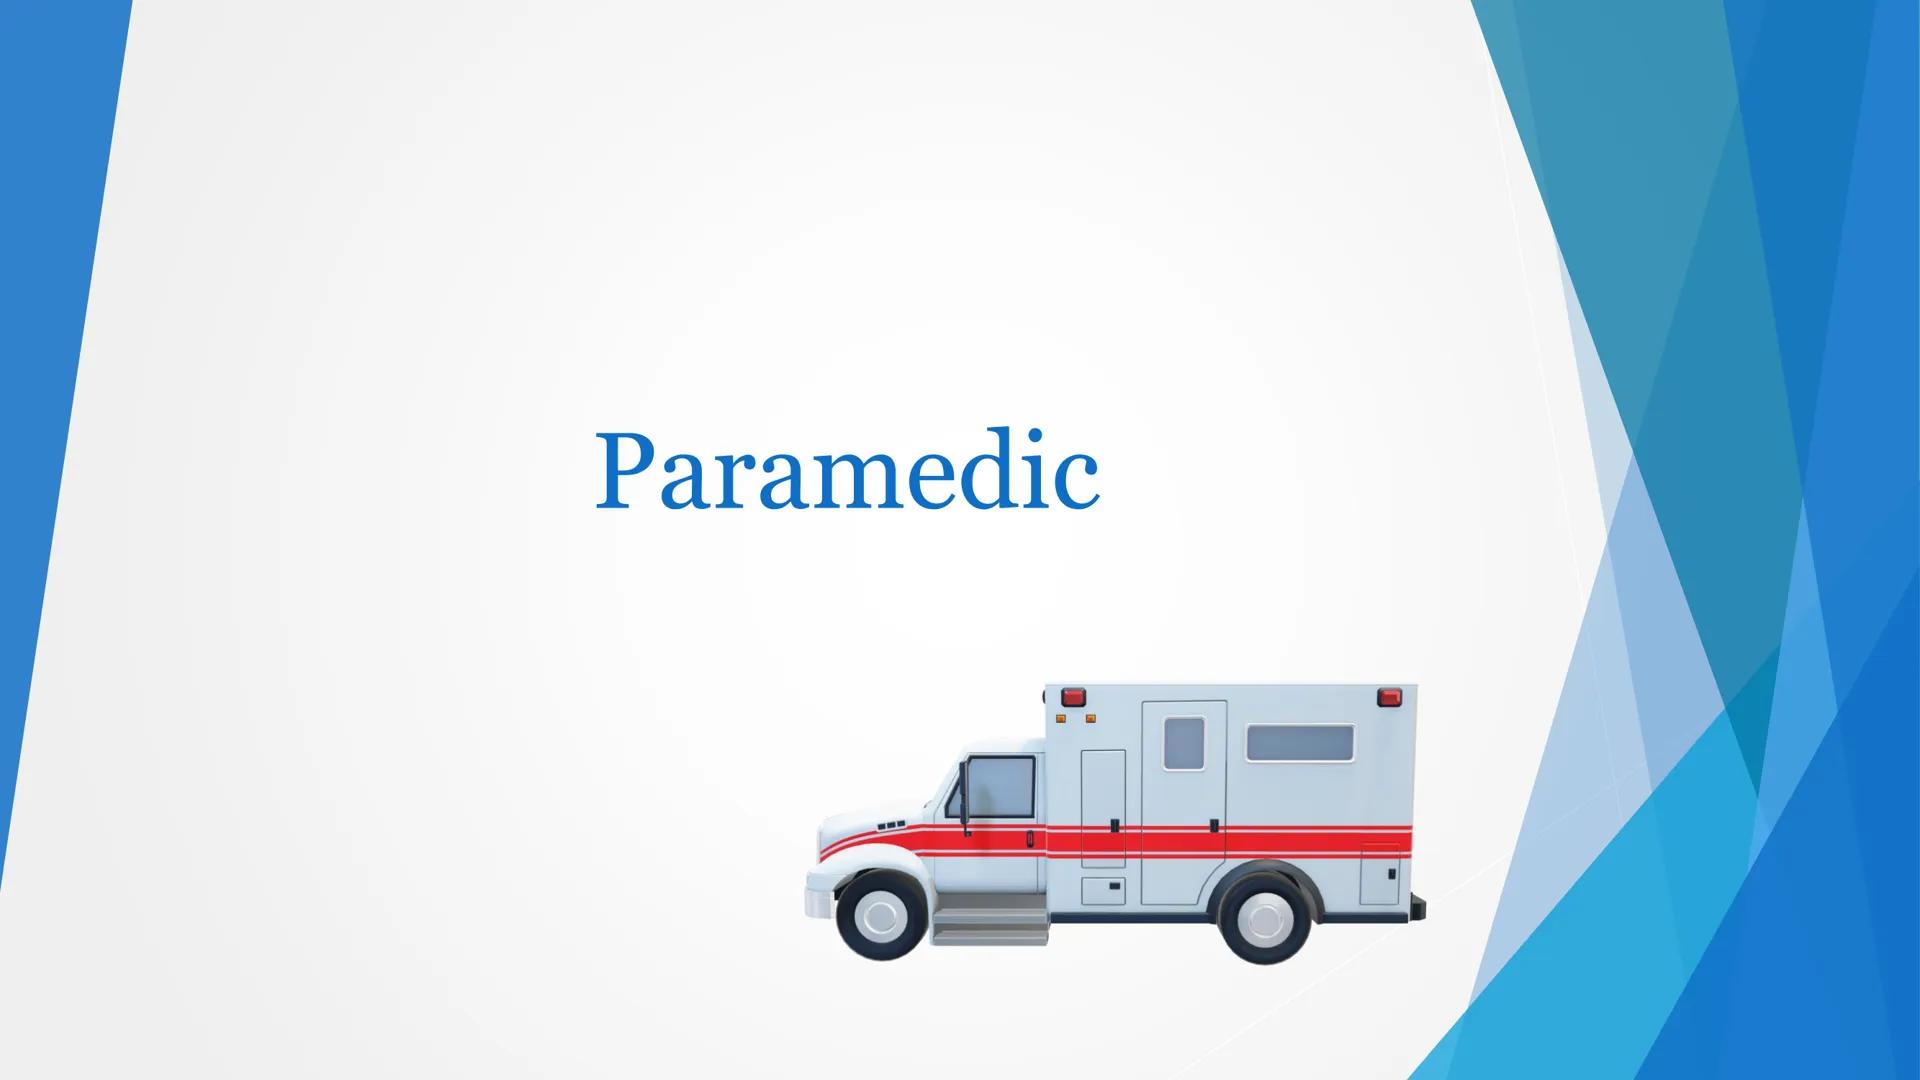 Paramedic Content
► Why do I want to be a paramedic?
Requirements
Education
Tasks
Workwear
► Workplaces
Working hours and the wage
Daily rou